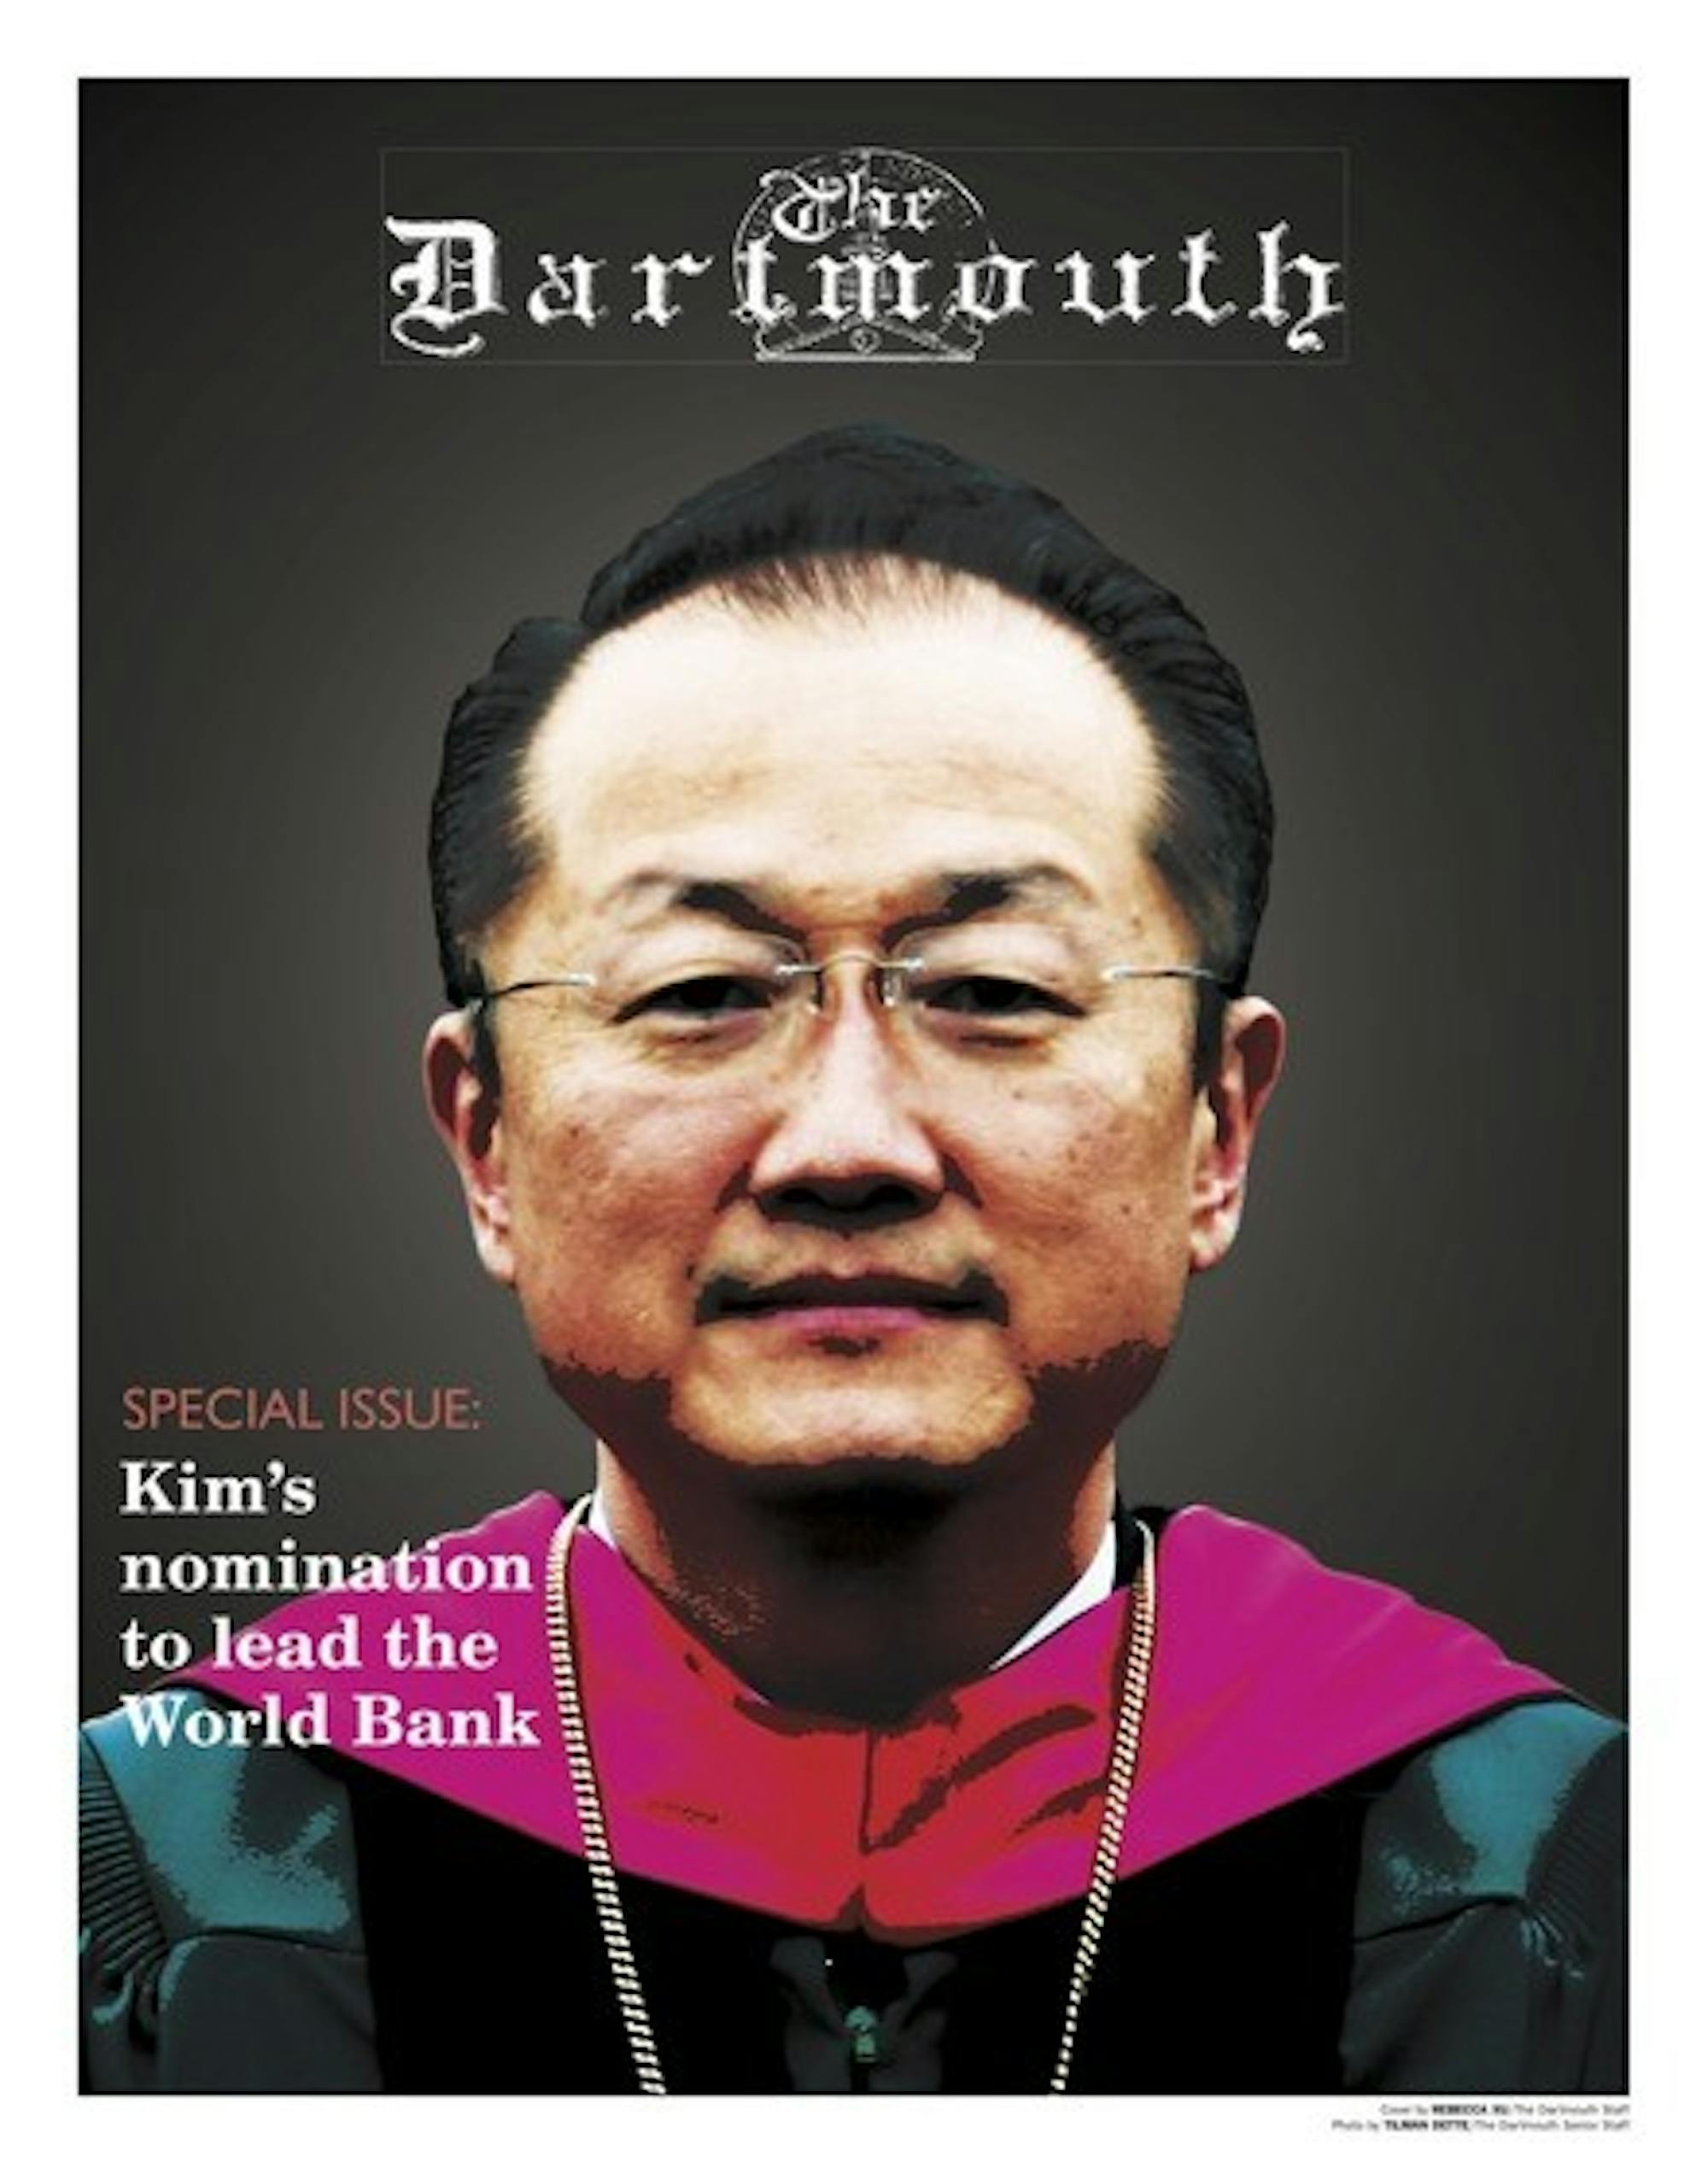 This article appeared in a special issue of The Dartmouth examining College President Jim Yong Kim's nomination to head the World Bank.